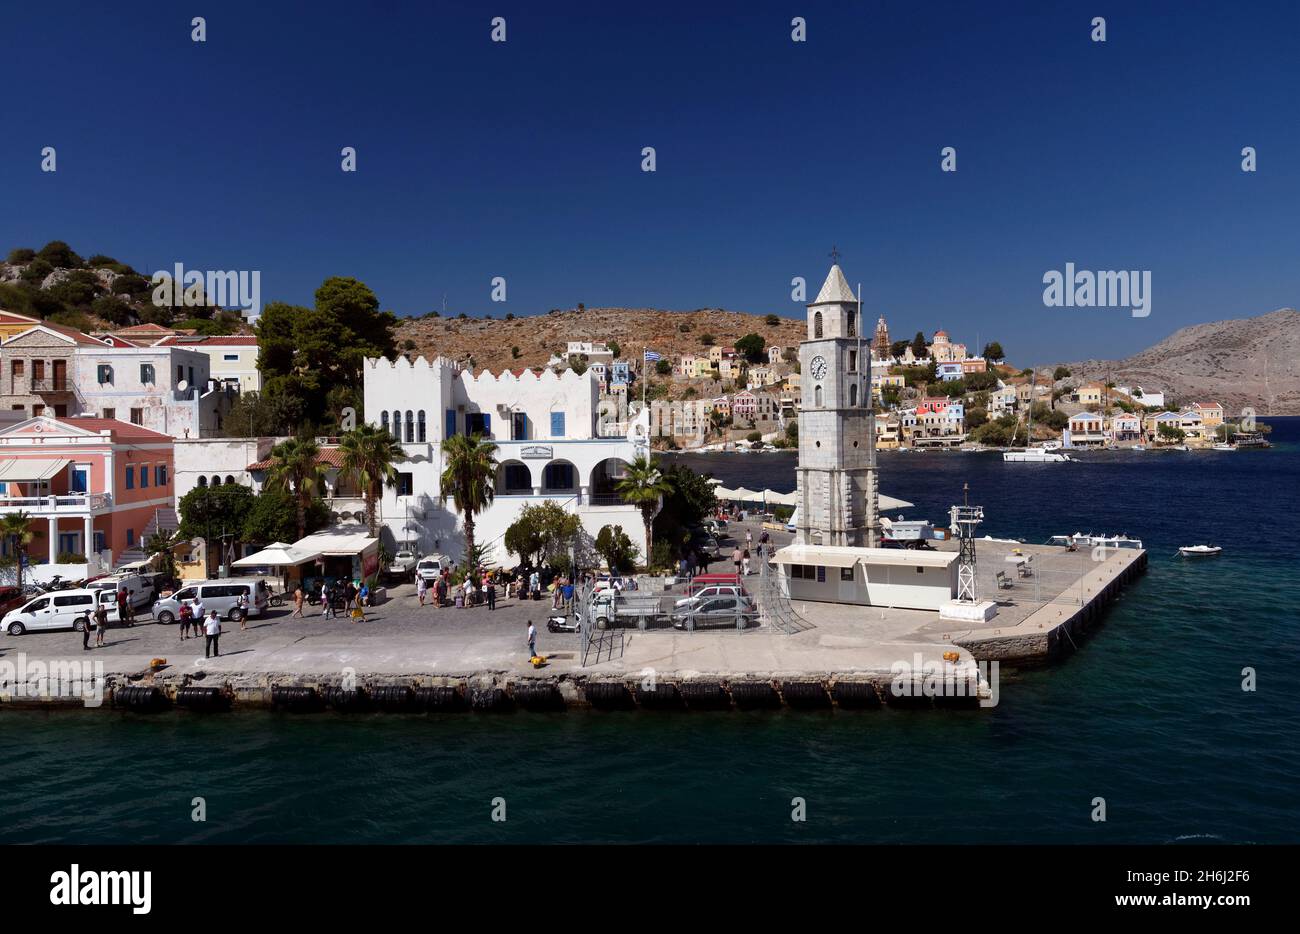 Symi Harbour, Dodecanese Islands, Southern Aegean, Greece Stock Photo